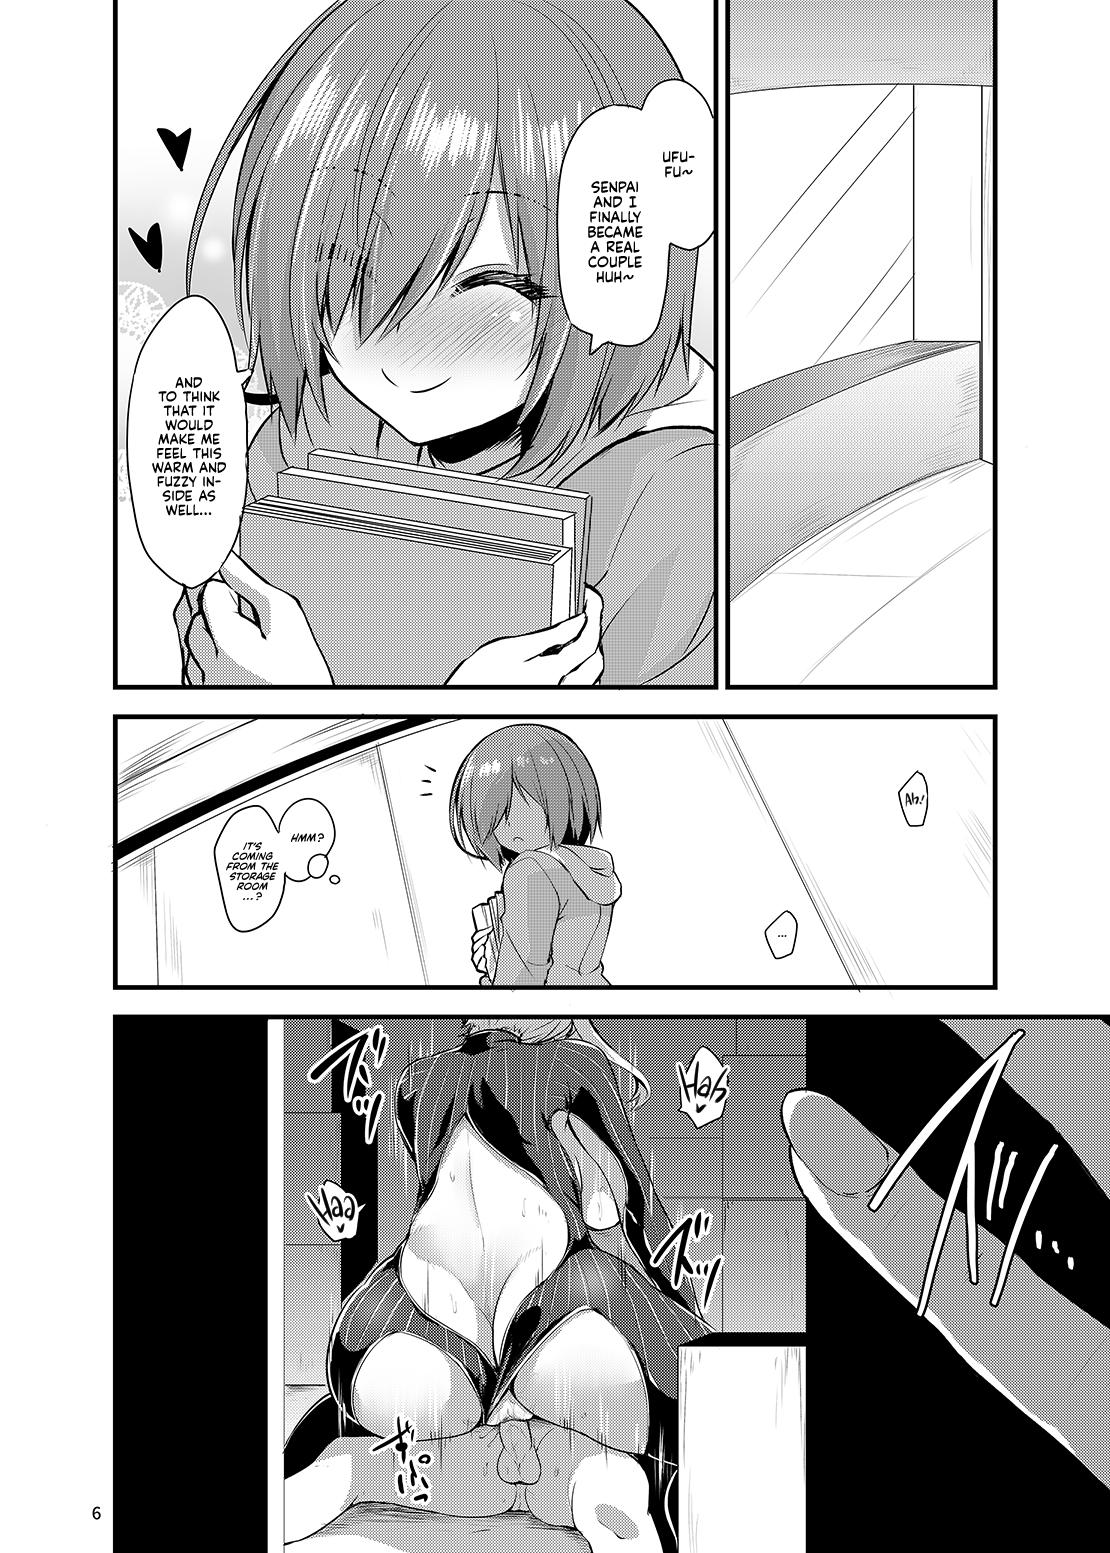 Glamcore A Book About a Corrupted Mash Recklessly Making Love to Her NTR'd Master - Fate grand order Masturbando - Page 5